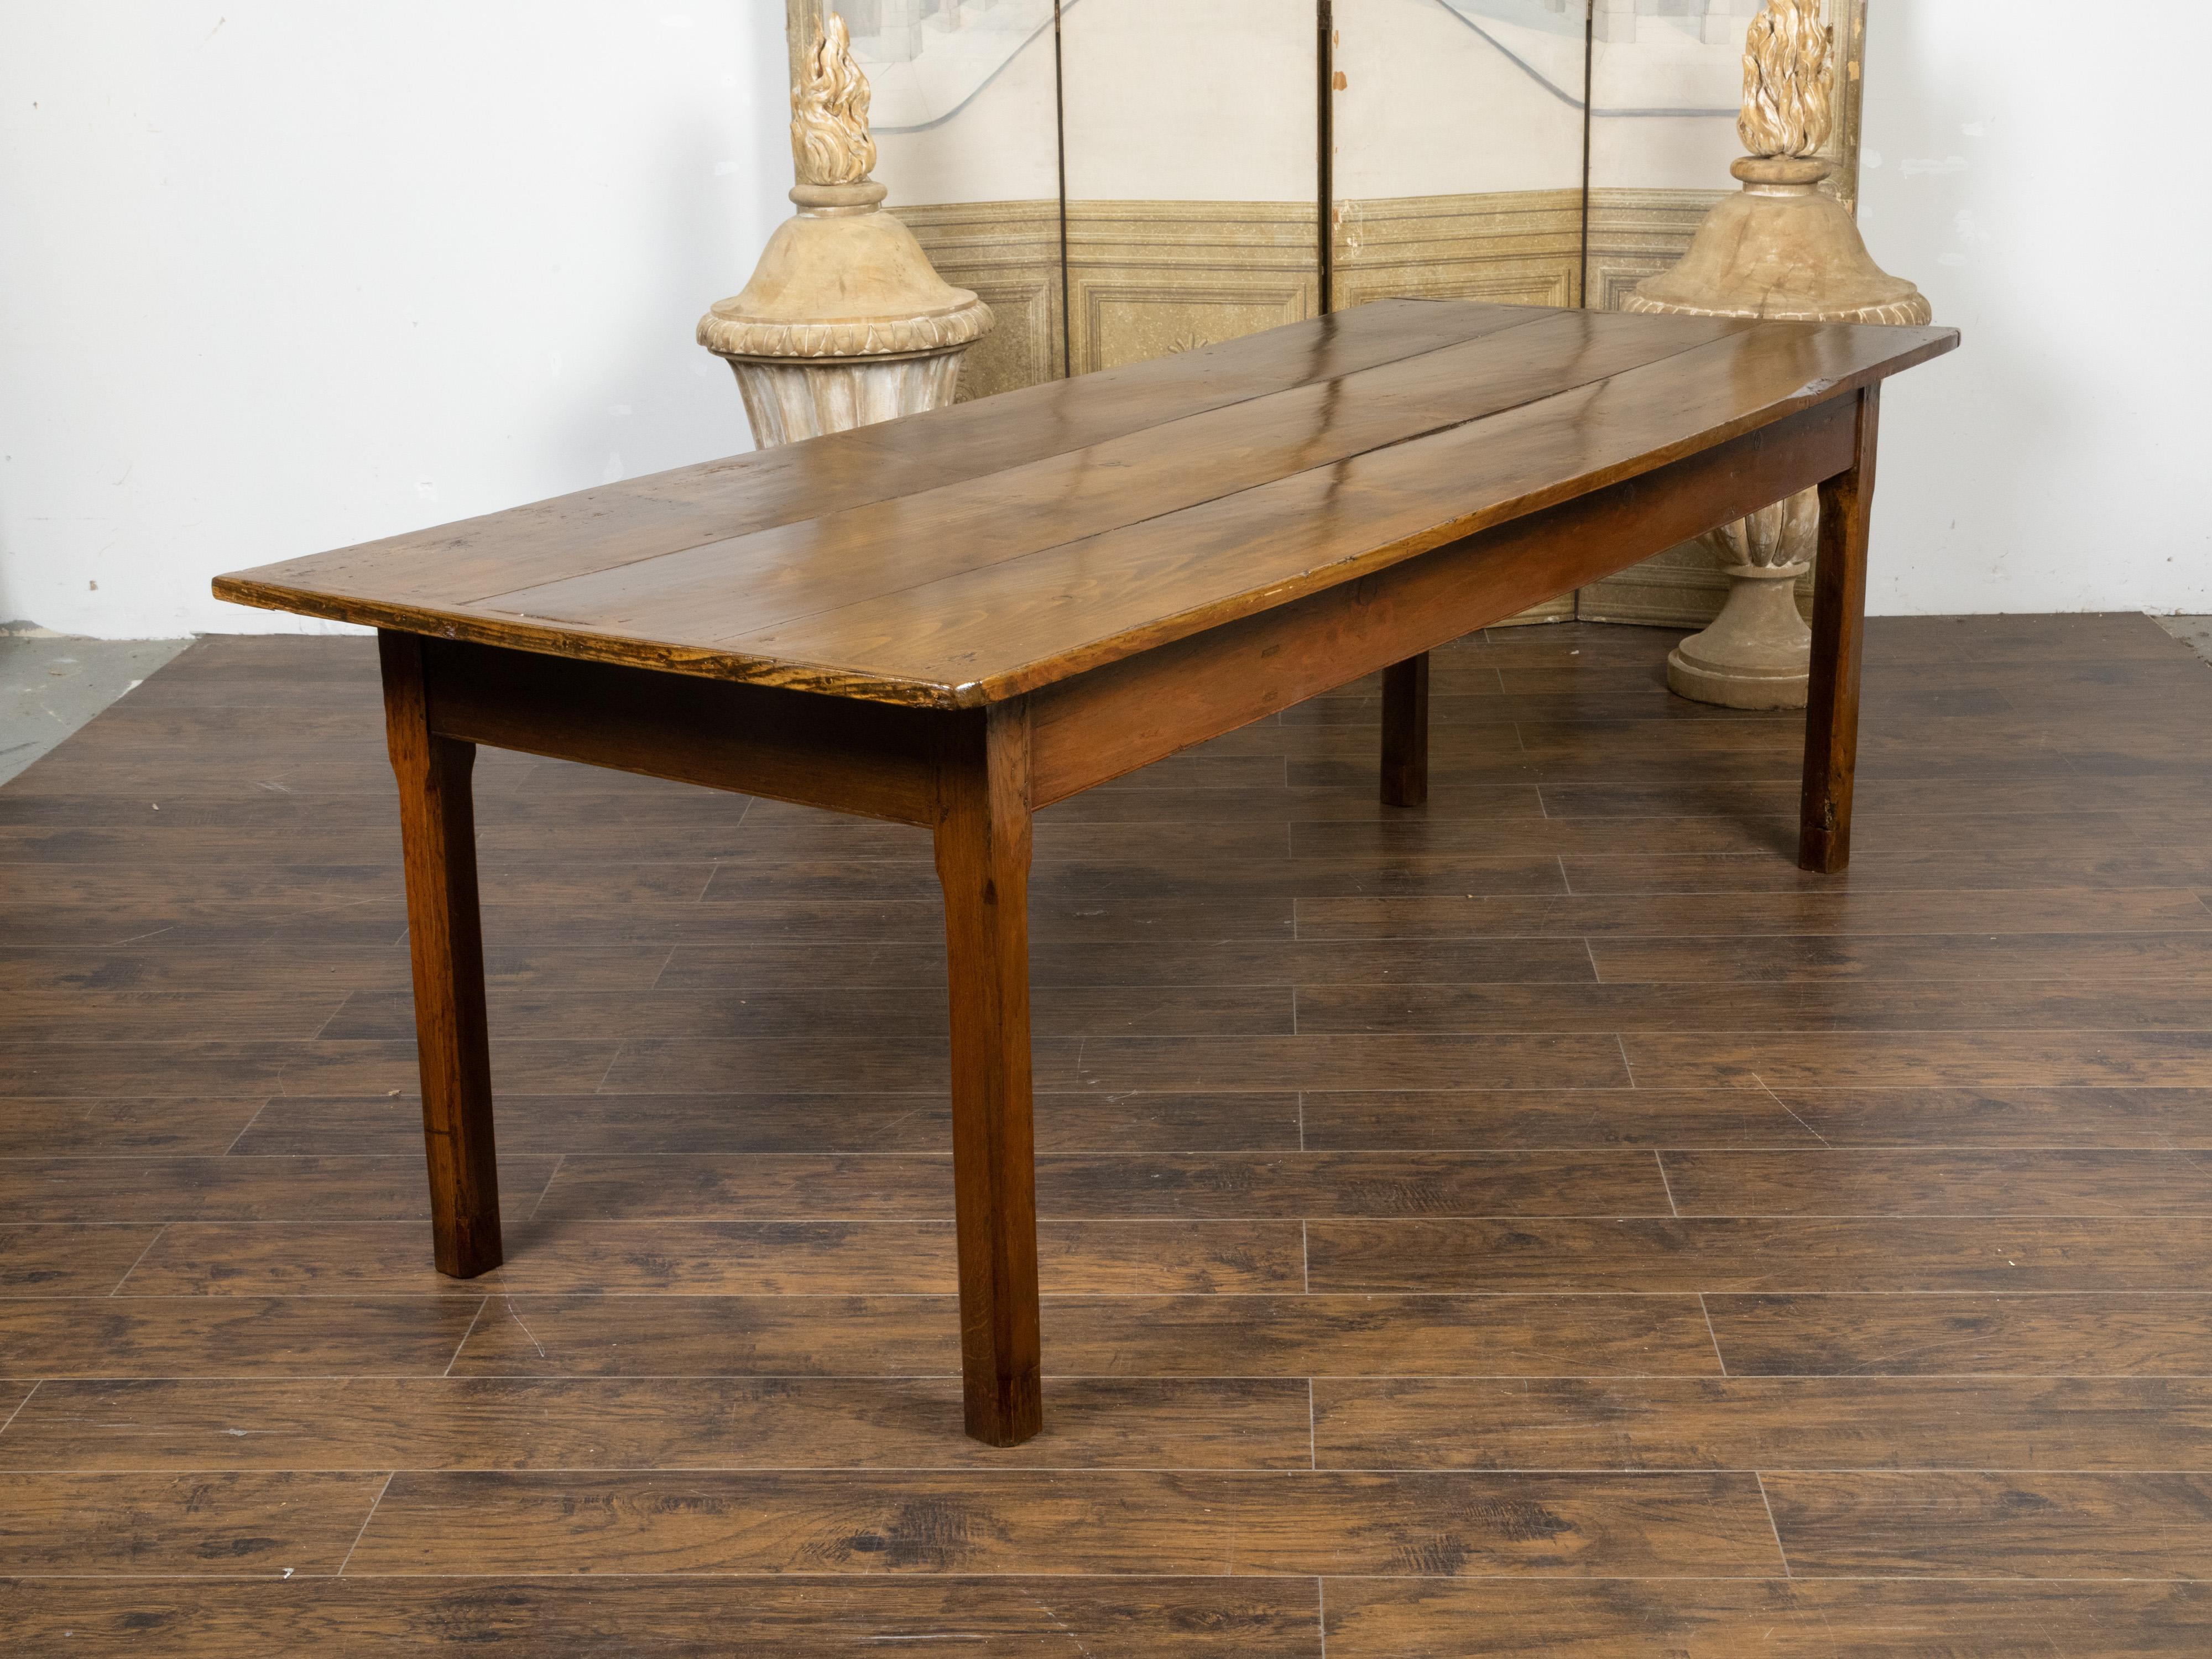 A large rustic Country French pine farm dining table from the 19th century, with straight legs, dark patina and distressed appearance. Created in France during the 19th century, this farm pine table features a rectangular planked top with rounded